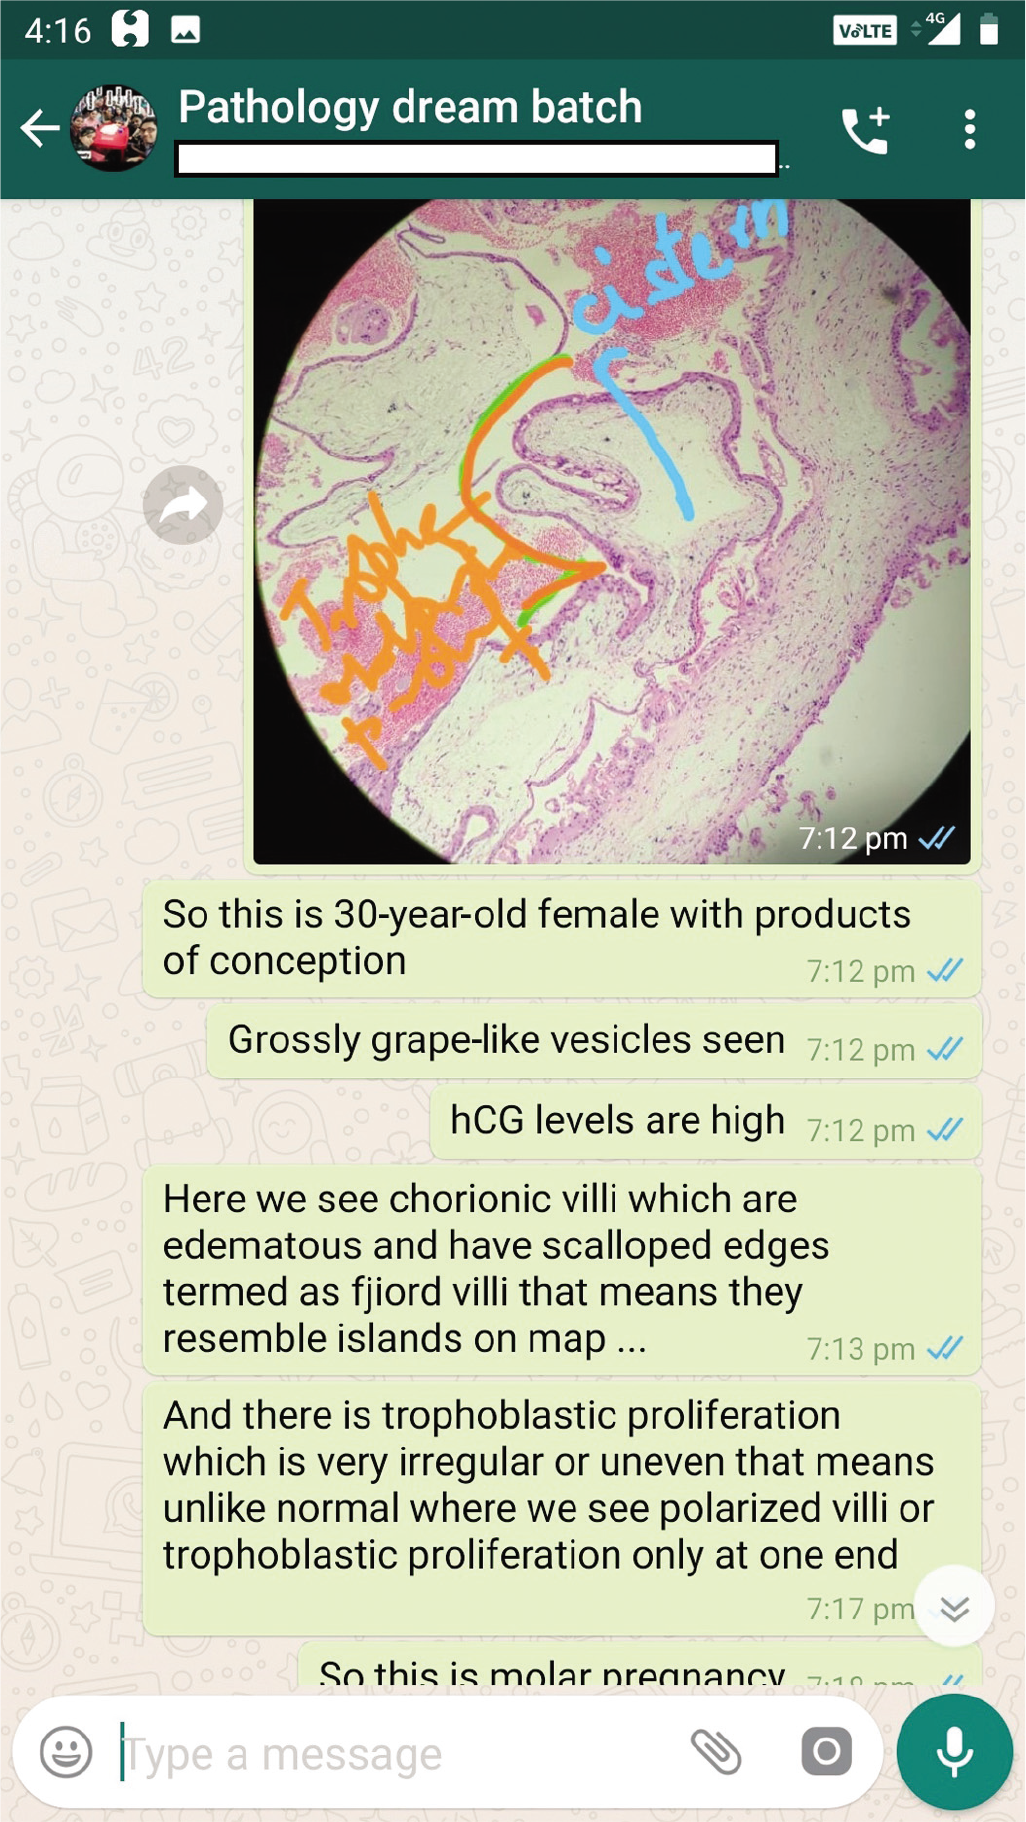 A screenshot of the smartphone screen showing the histomorphological details being discussed after the image is posted